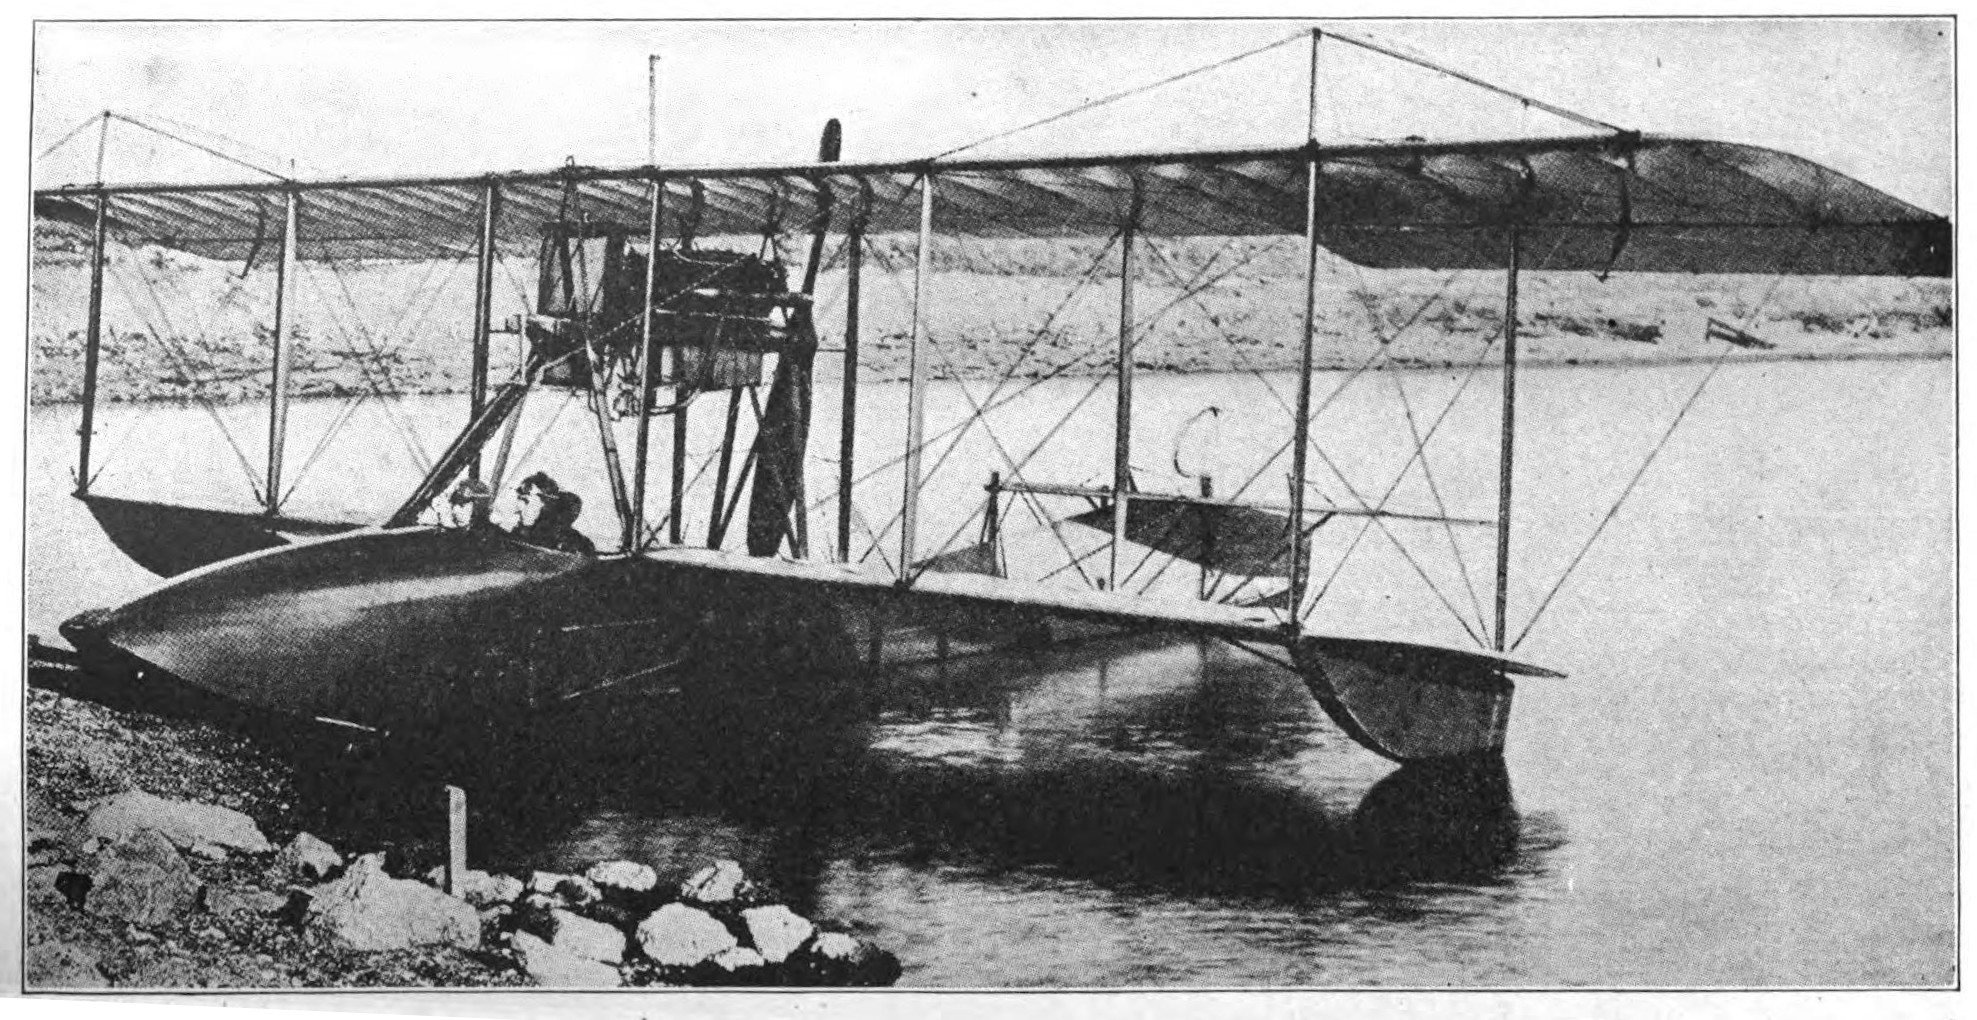 An Aeroplane Equipped with the Light Boat Hull Shown, in this Figure is Known as a "Flying Boat".